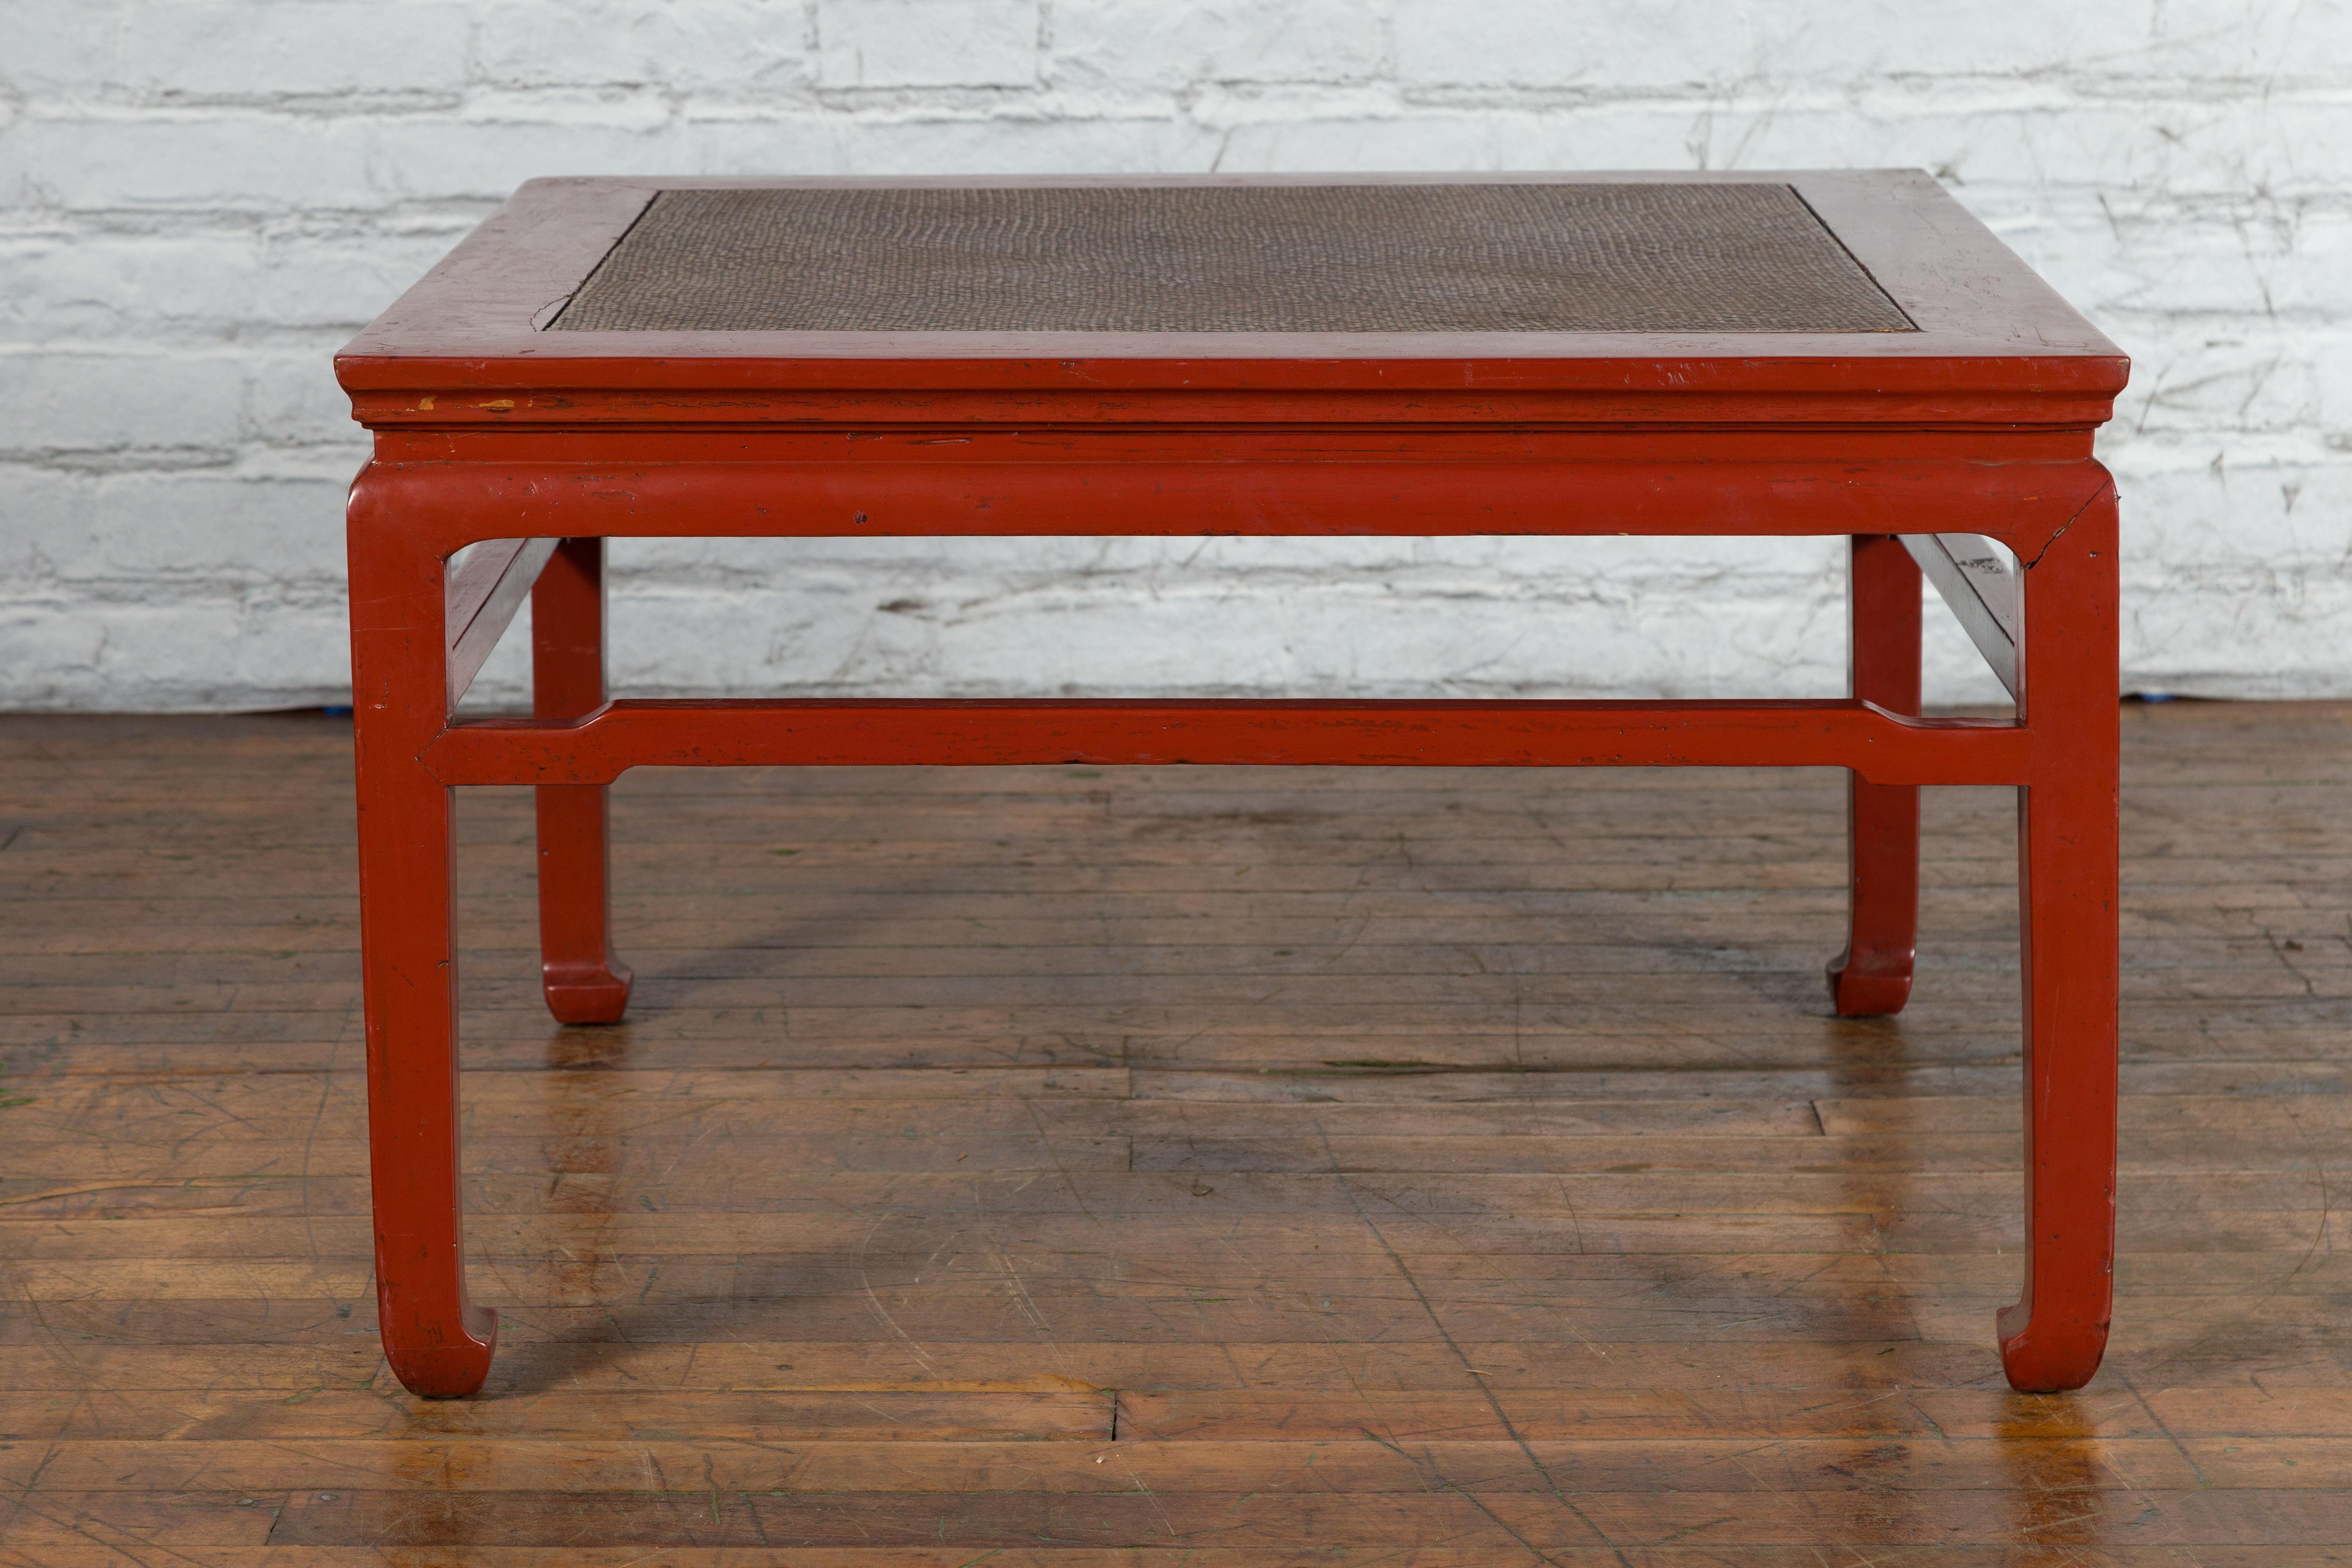 An antique Chinese wooden coffee table from the early 20th century, with red lacquer ground, hand woven rattan top, humpback stretcher on all sides and horse hoof legs. Created in China during the early years of the 20th century, this antique coffee